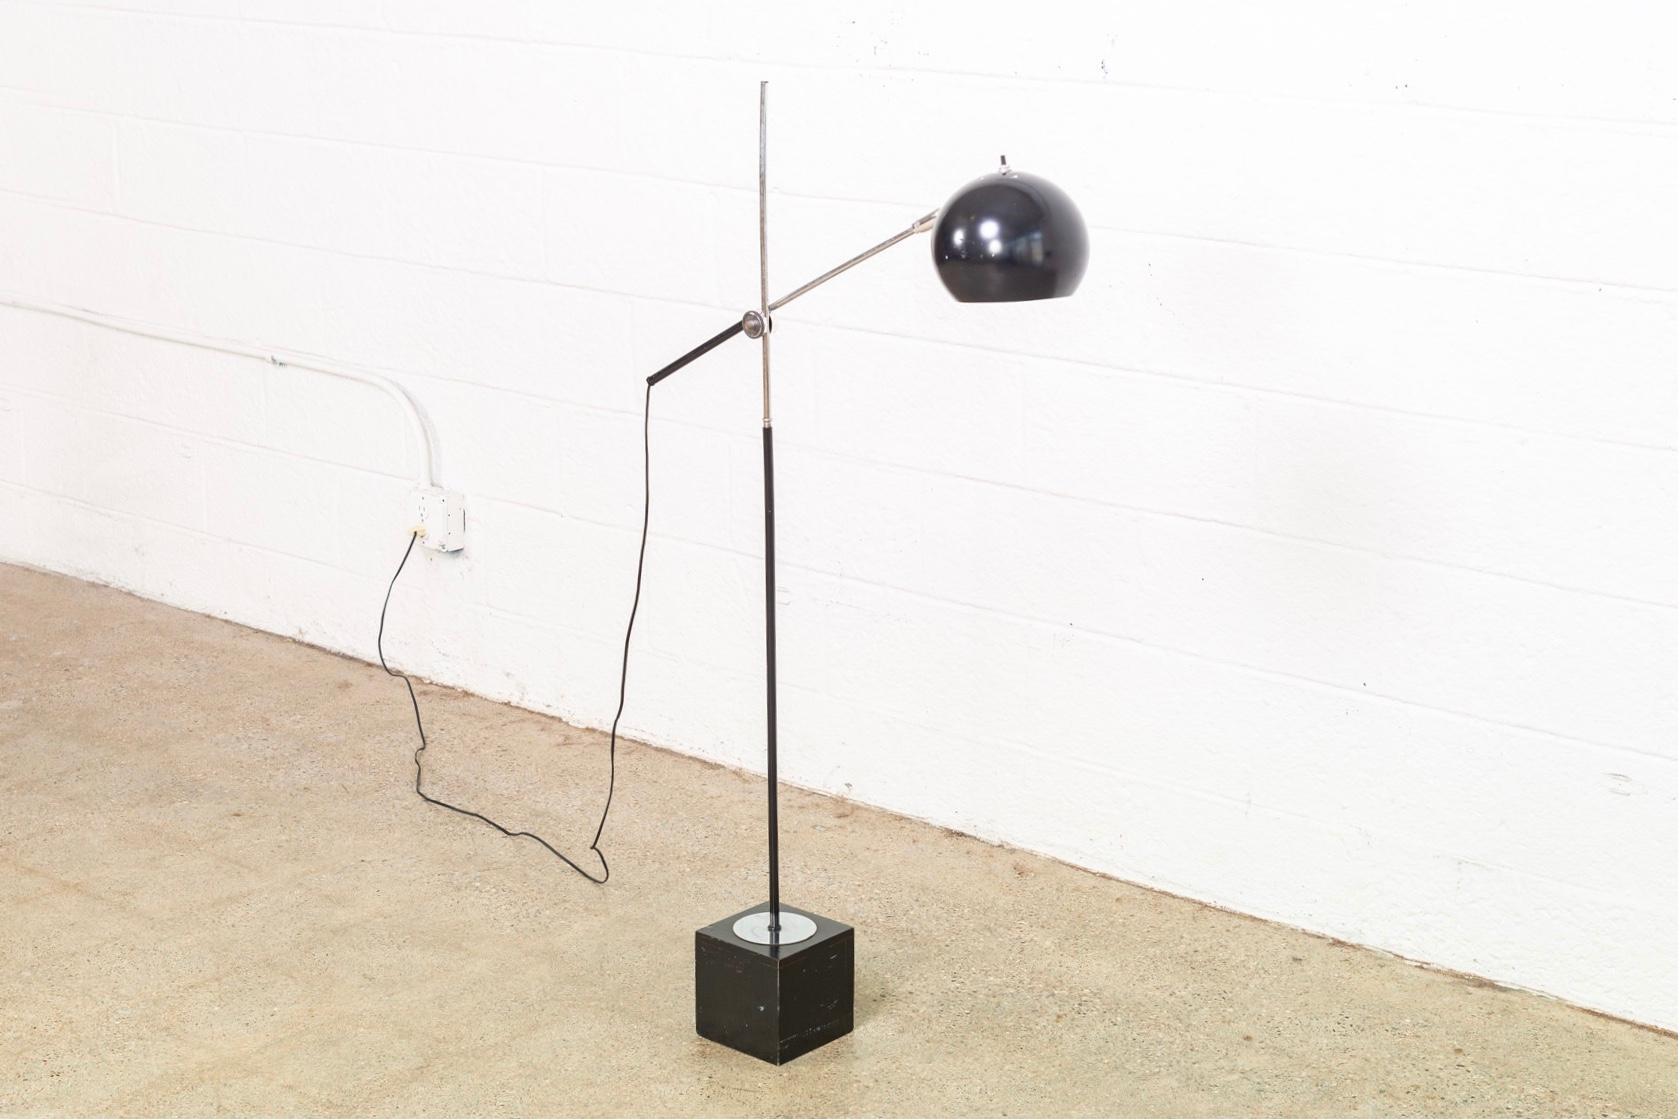 This vintage Mid-Century Modern single orb black articulating floor lamp in the style of Sonneman and circa 1970 has a clean modernist design. The swing arm rotates 360 degrees and can be raised and lowered vertically. The orb lamp shade pivots up